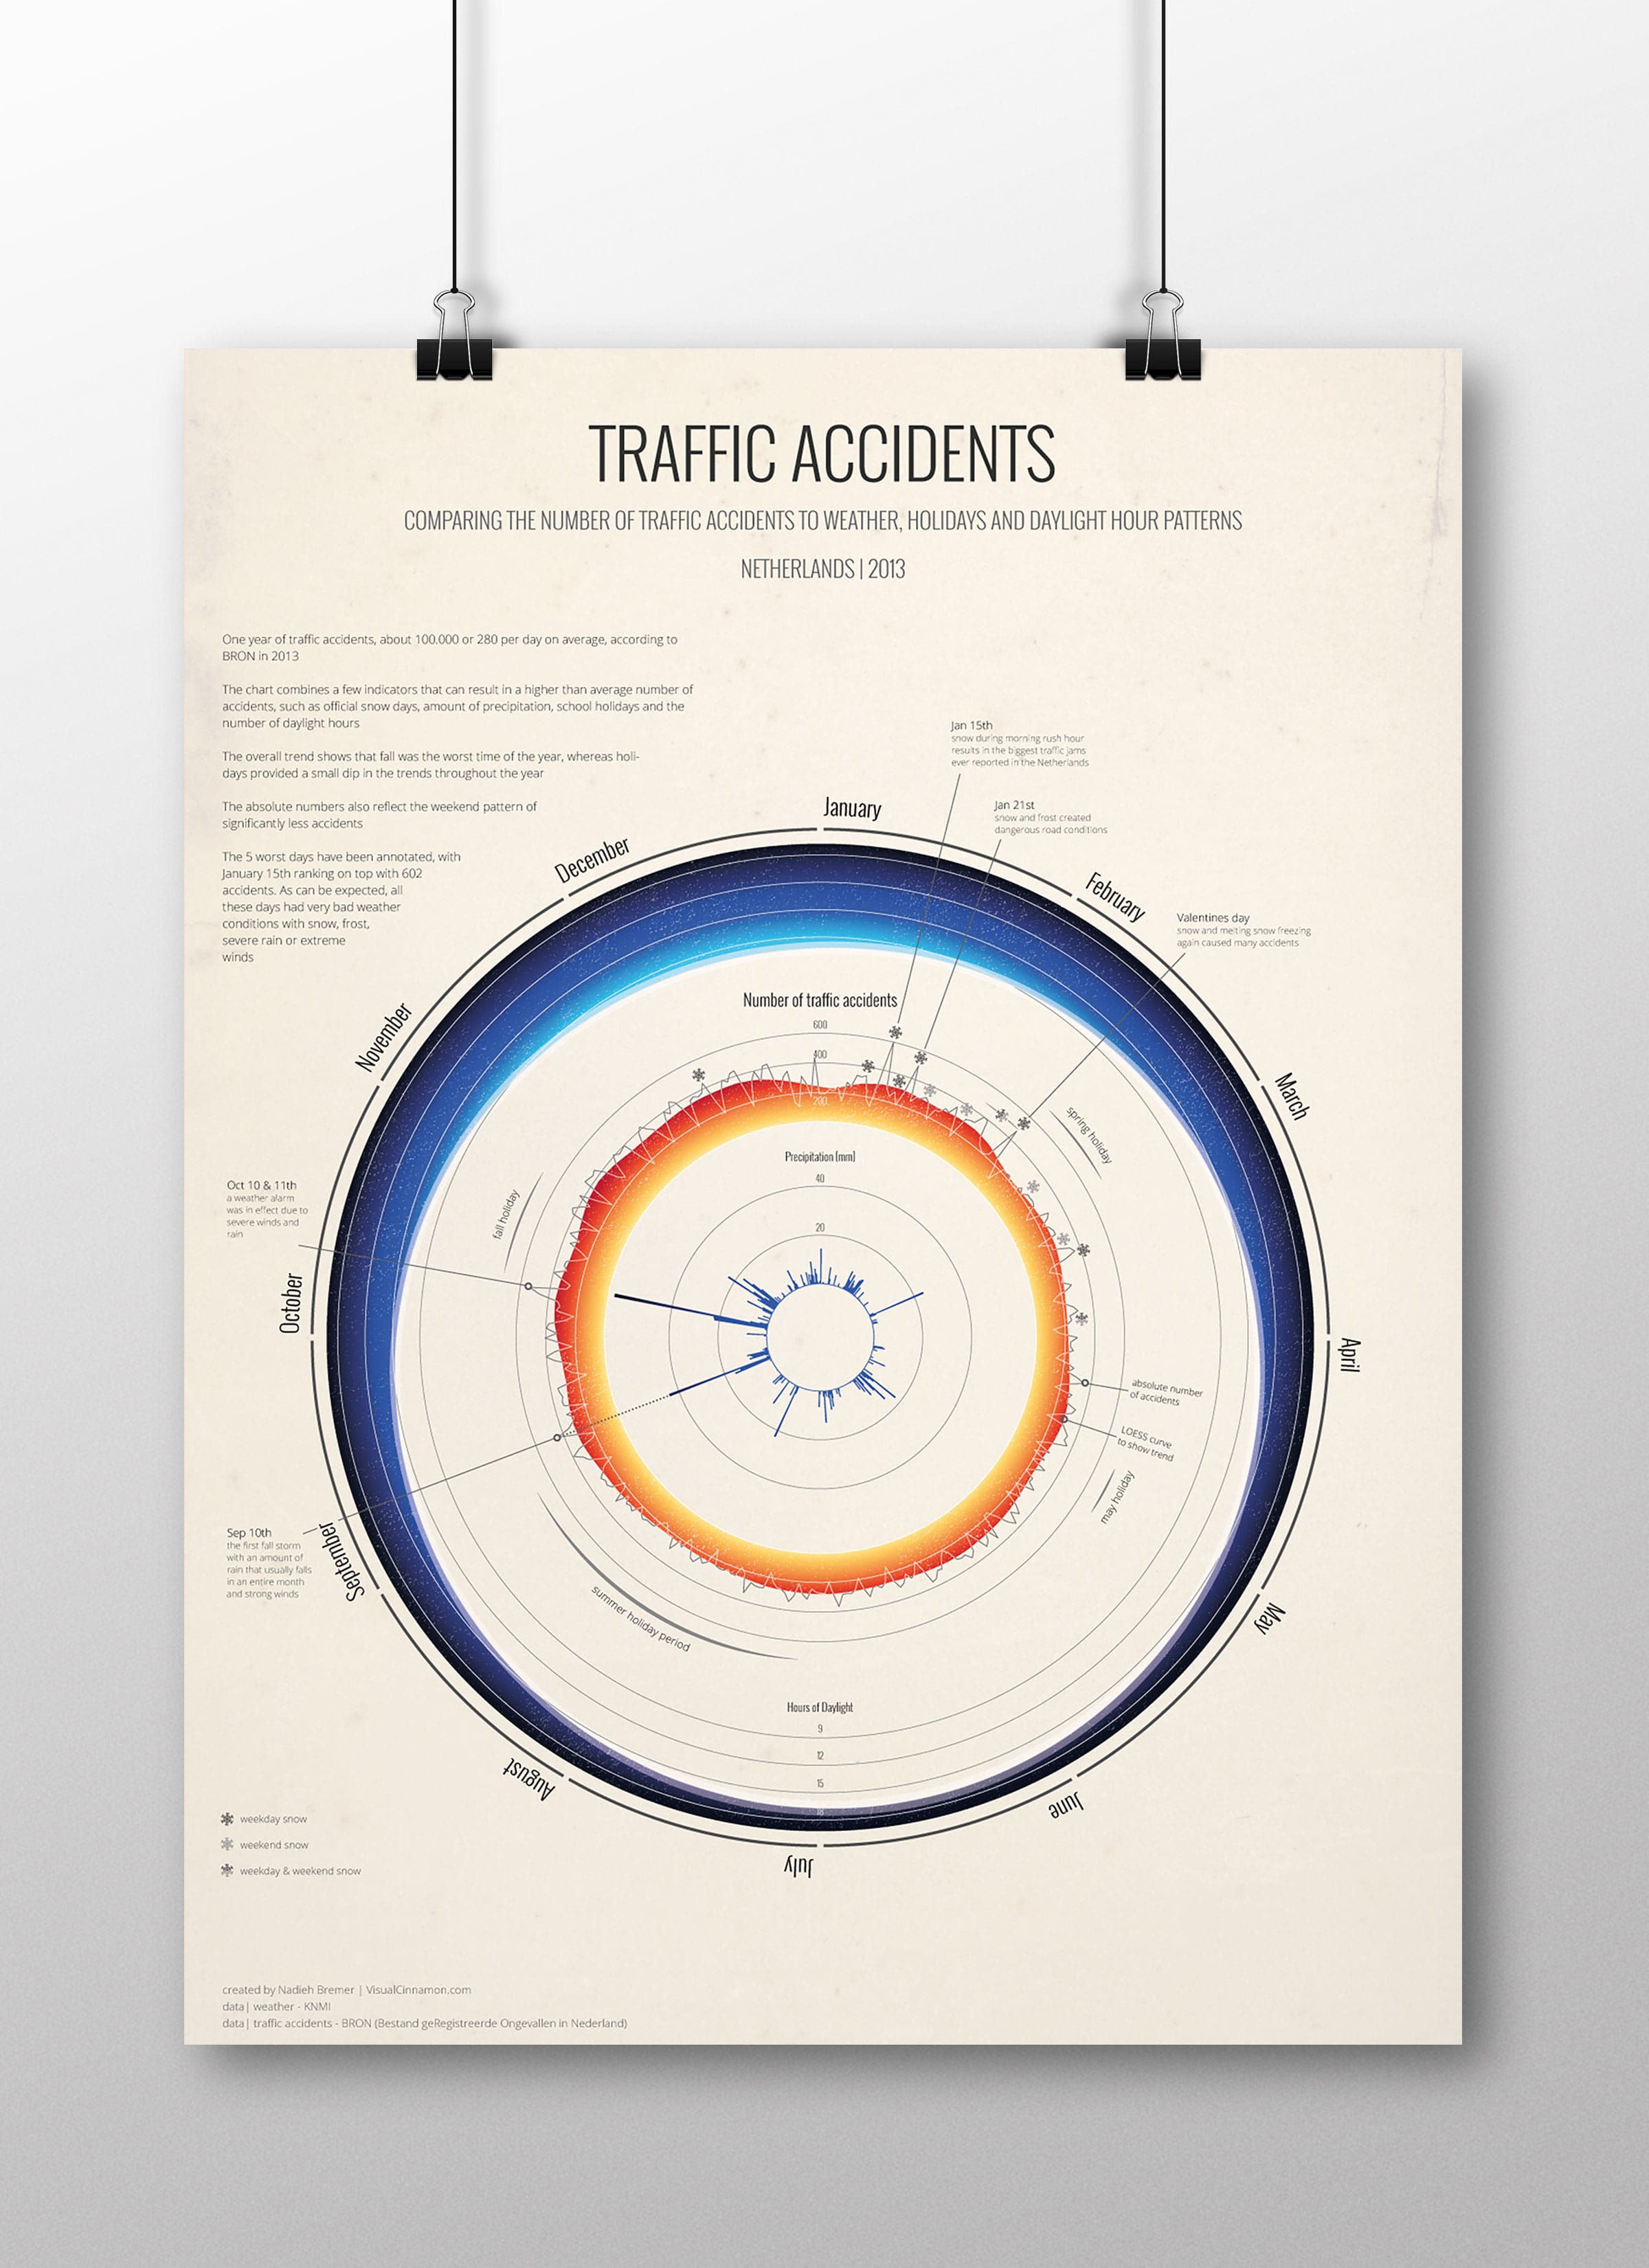 The complete 'Traffic Accidents' poster